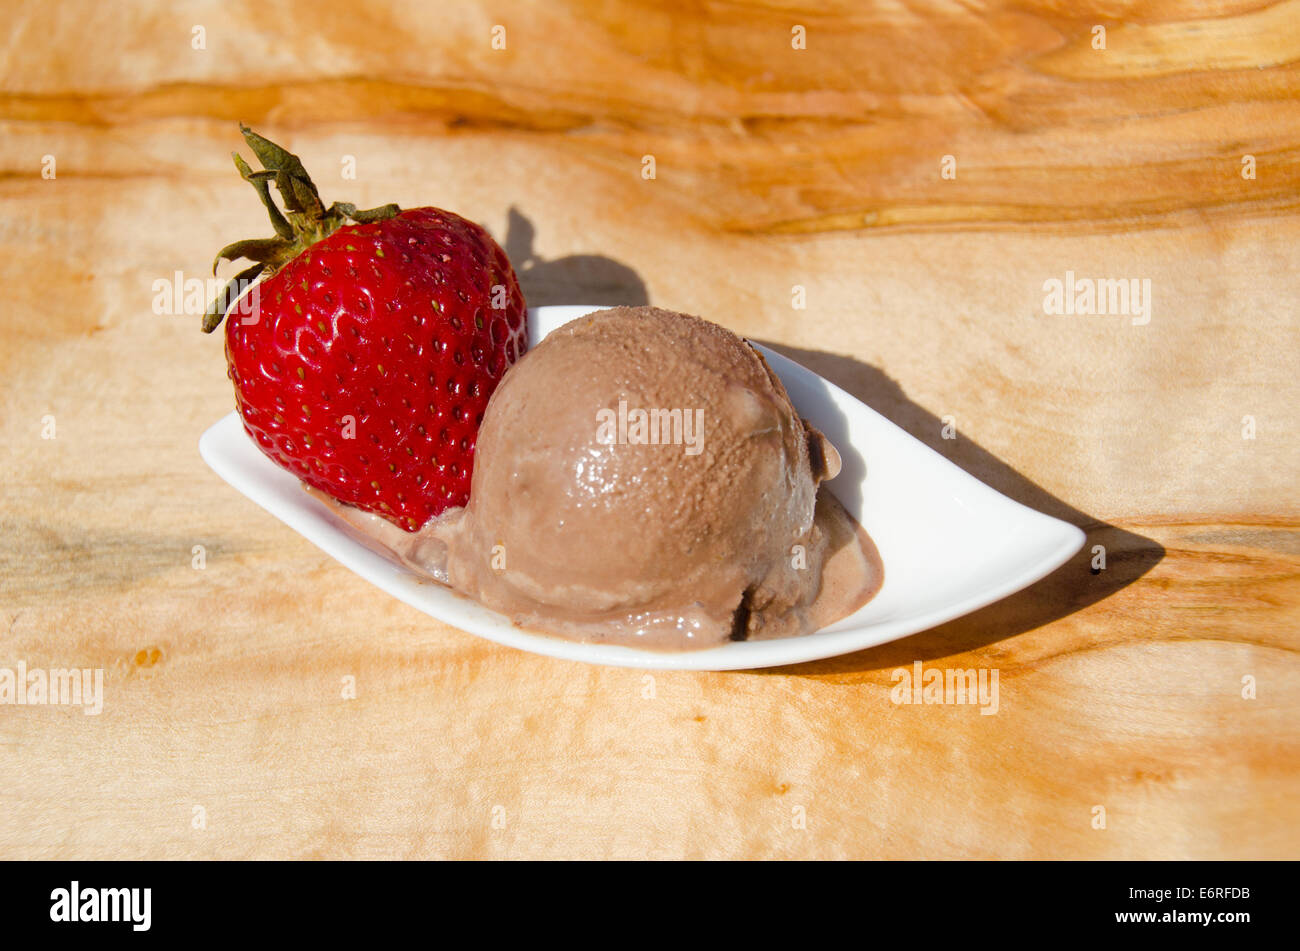 One scoop of chocolate sorbet, gelato or ice cream on a bowl with a strawberry at an outdoor picnic Stock Photo